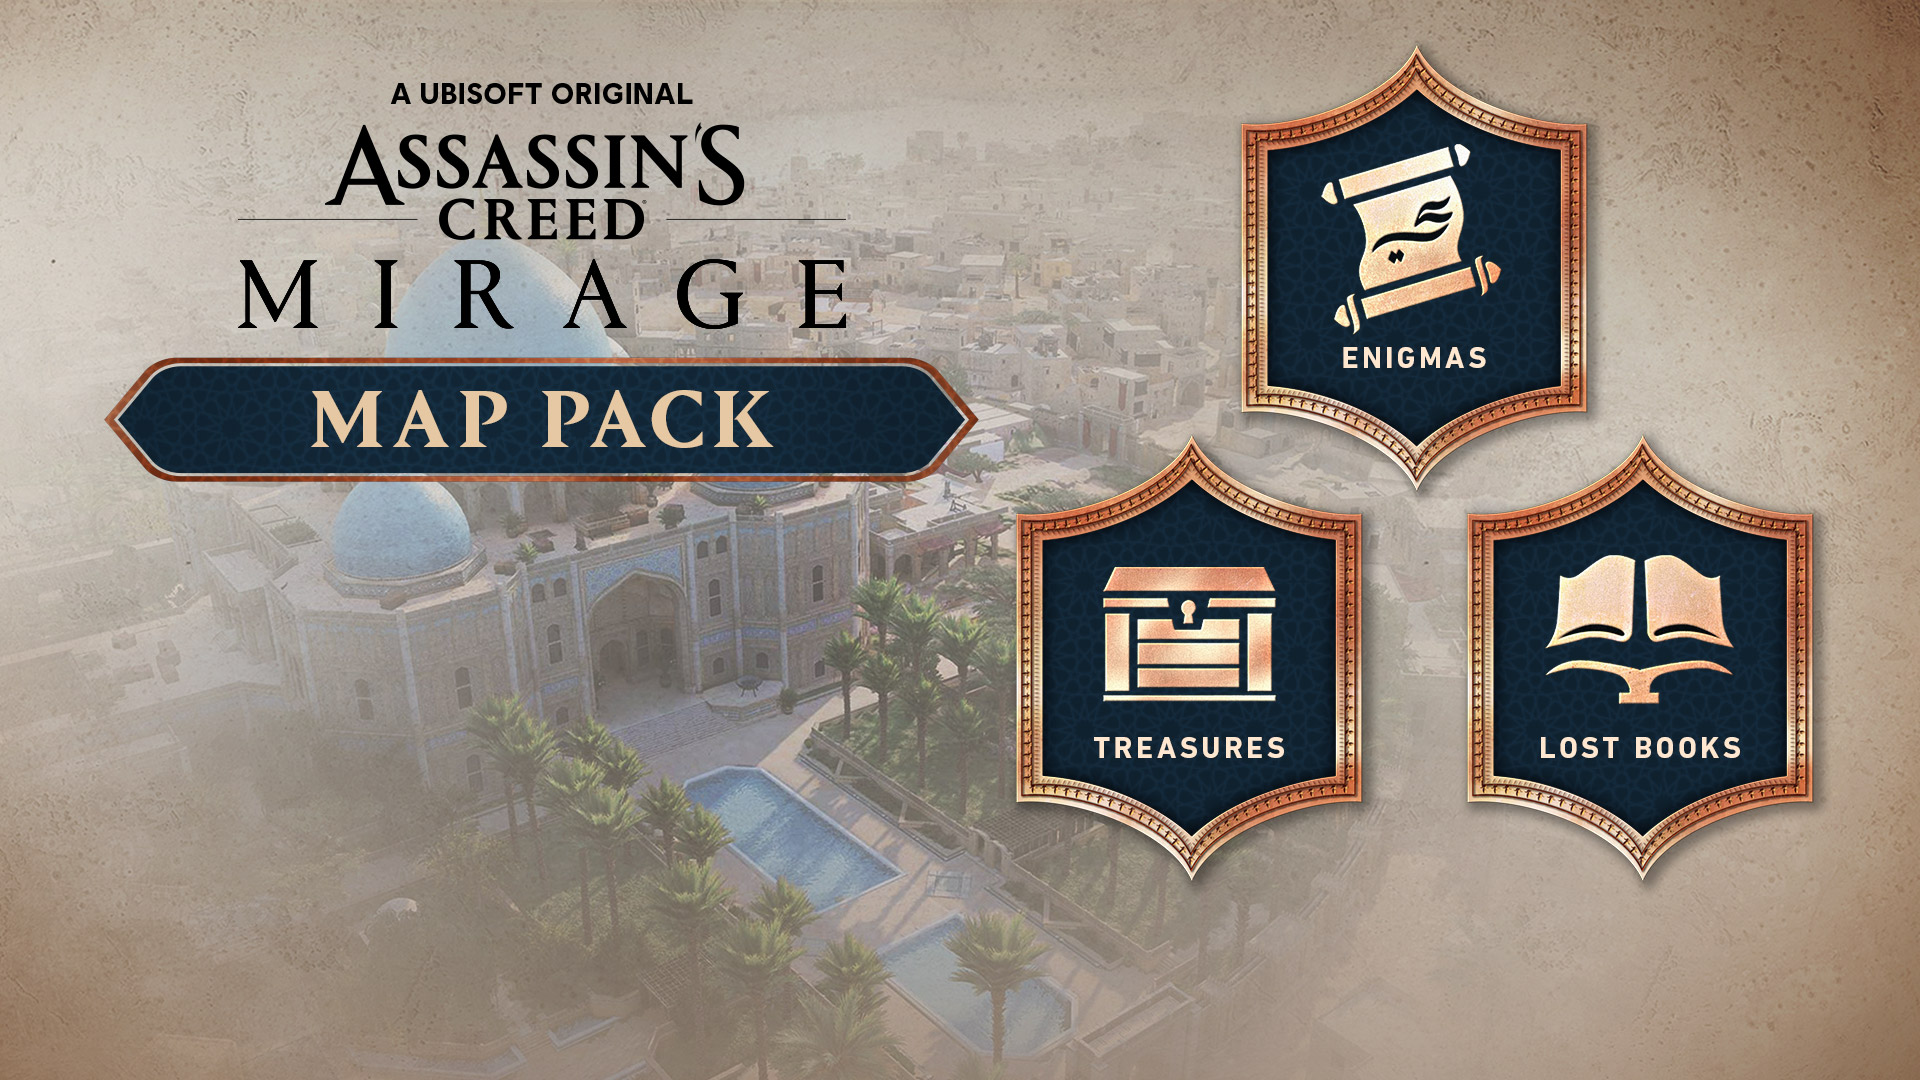 Assassin's Creed Mirage - Map Pack DLC AR XBOX One / Xbox Series X|S CD Key, 7.9$